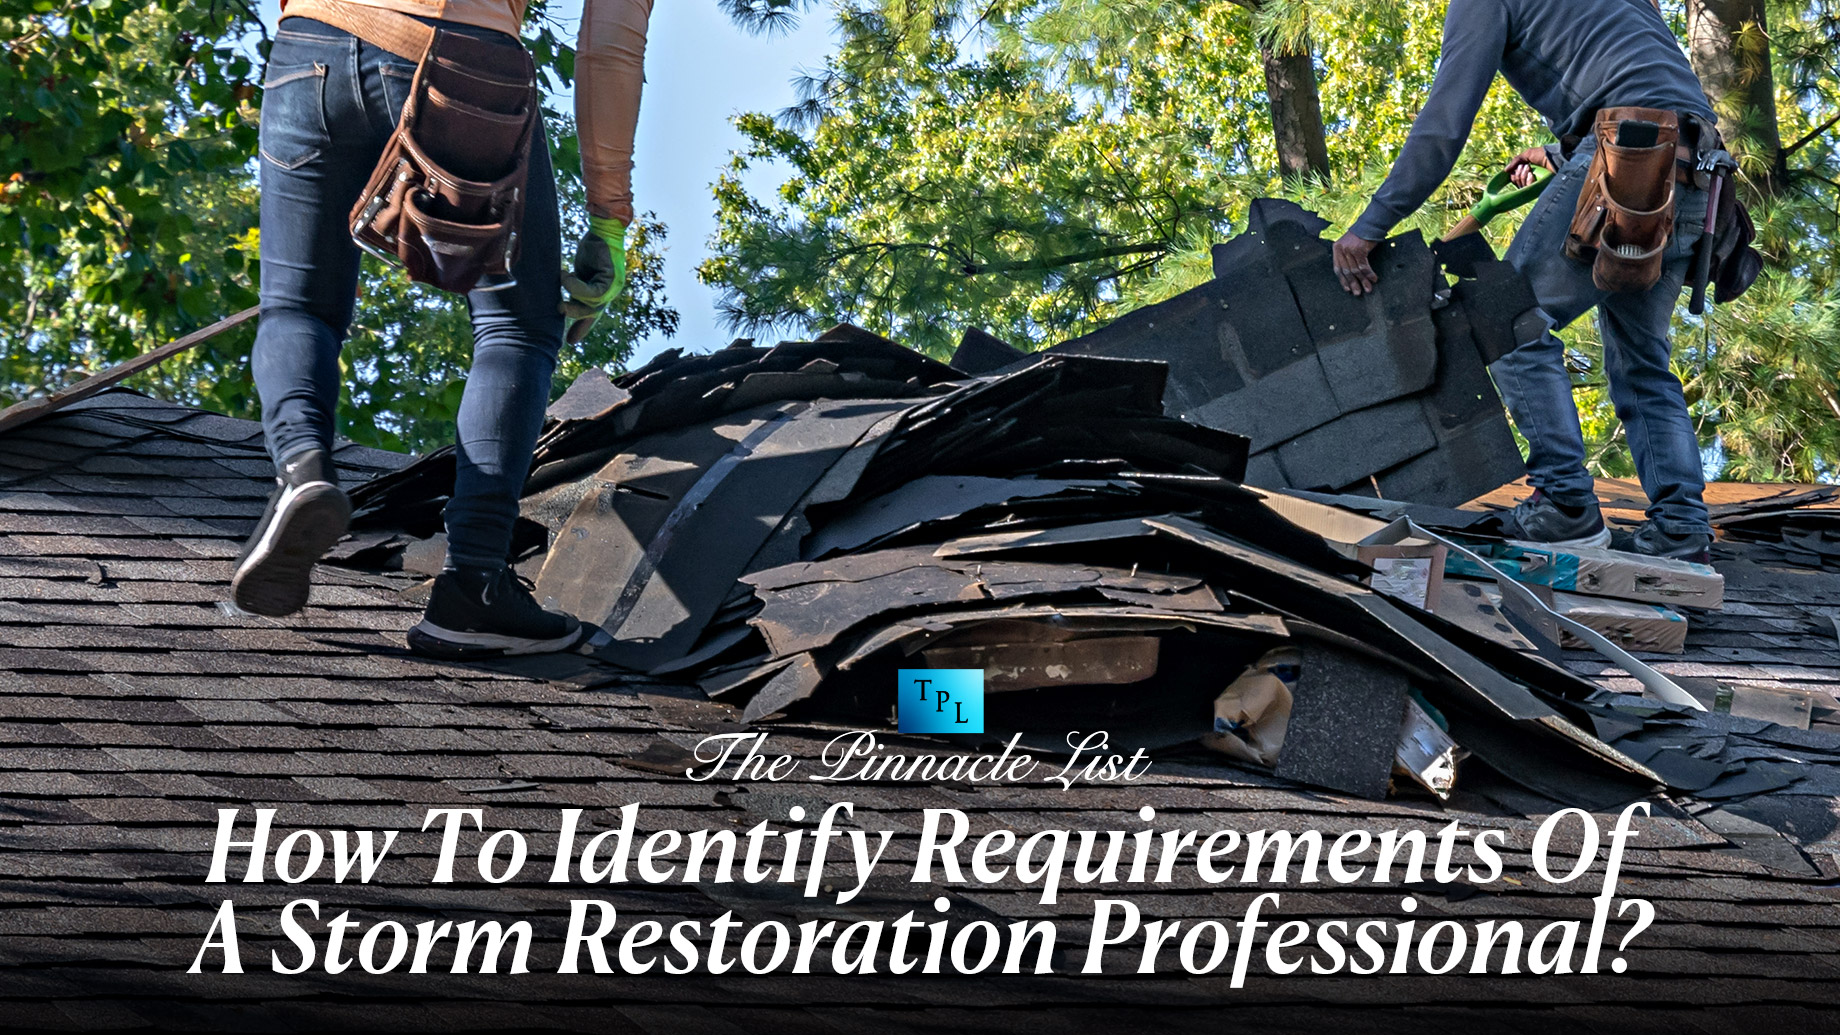 How To Identify Requirements Of A Storm Restoration Professional?